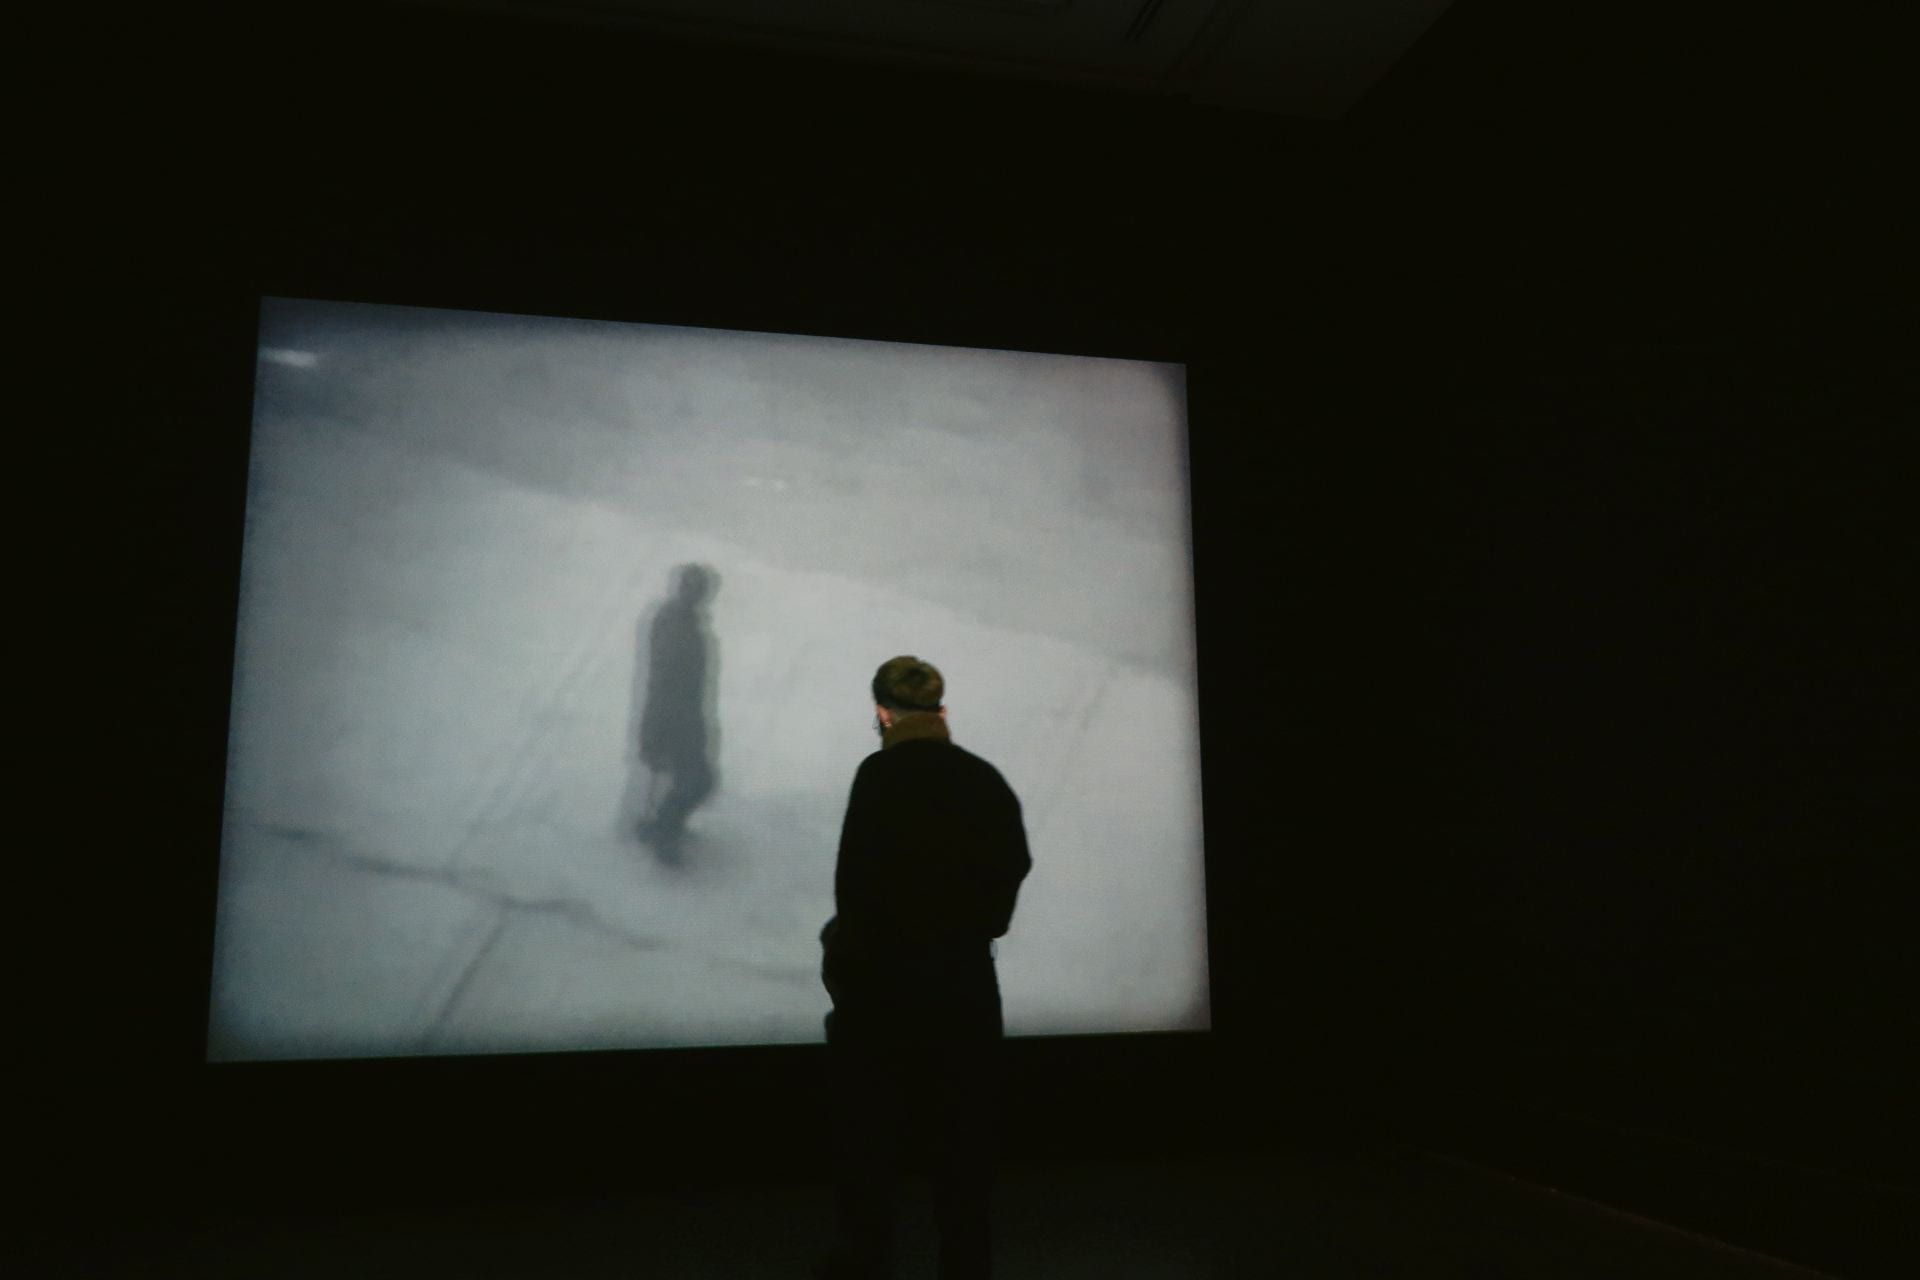 A person in a black coat, standing in a dark room, watches a black and white film.